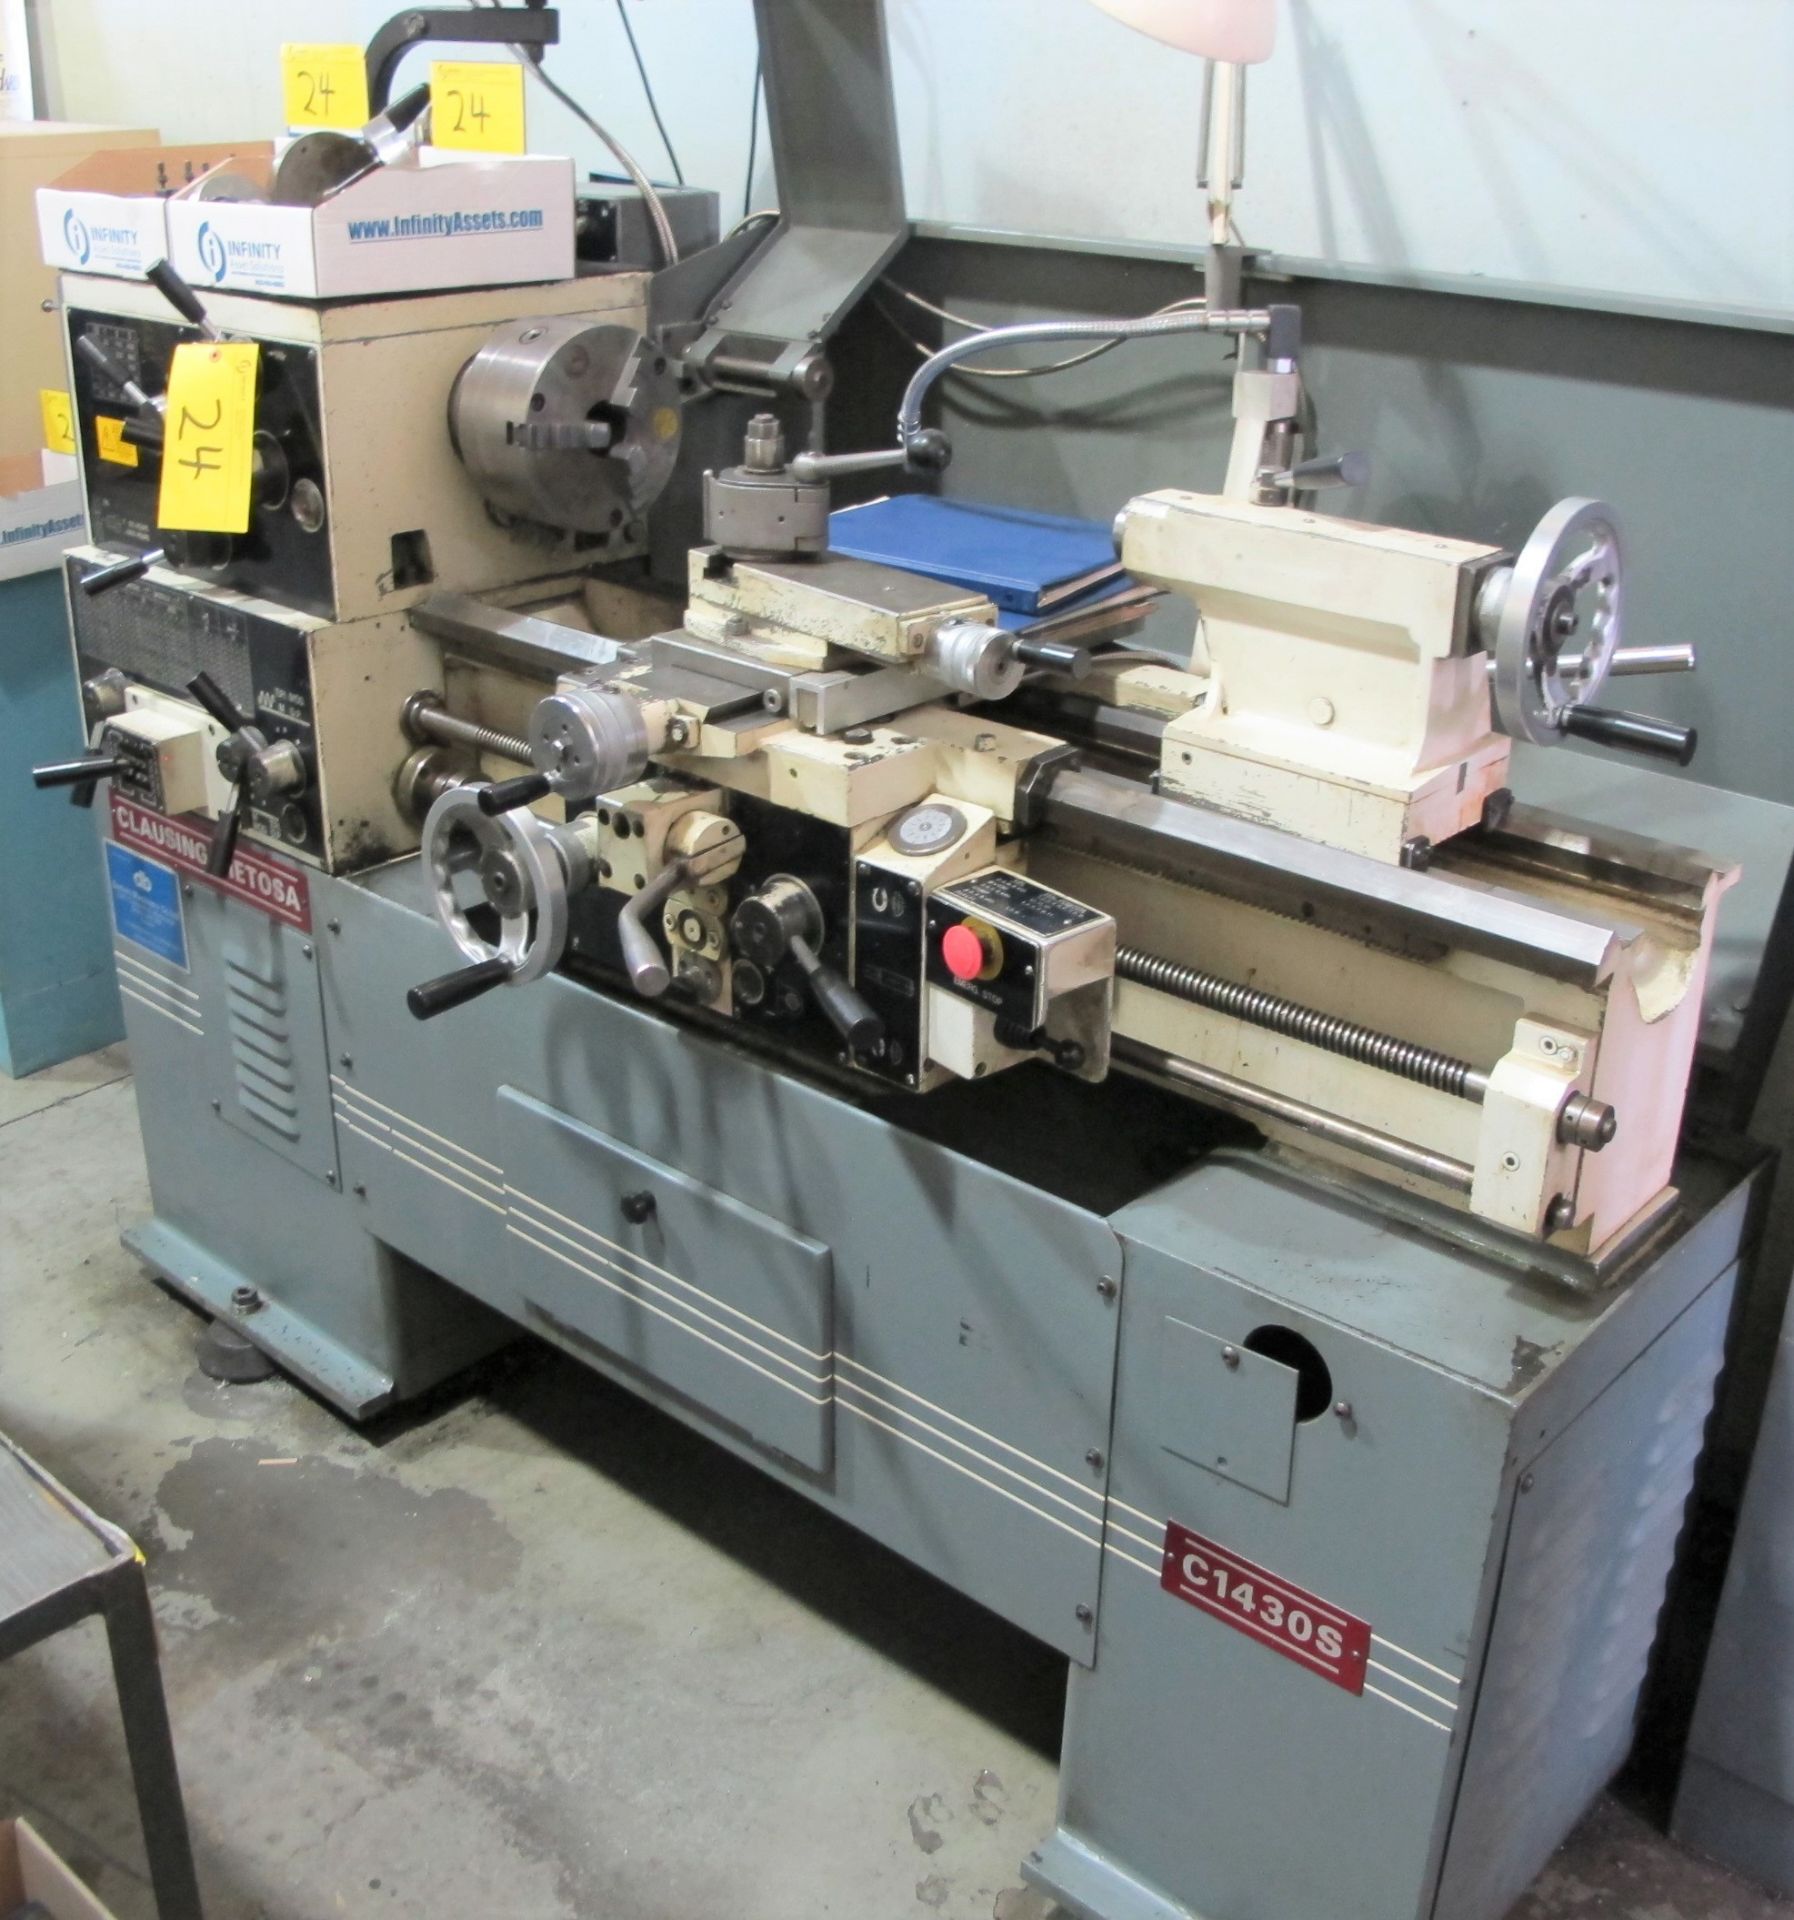 CLAUSING-METOSA C1430S LATHE, 8" 3-JAW CHUCK, ACURITE 2-AXIS DRO, 14” X 30”, SPEEDS TO 2,000 RPM,